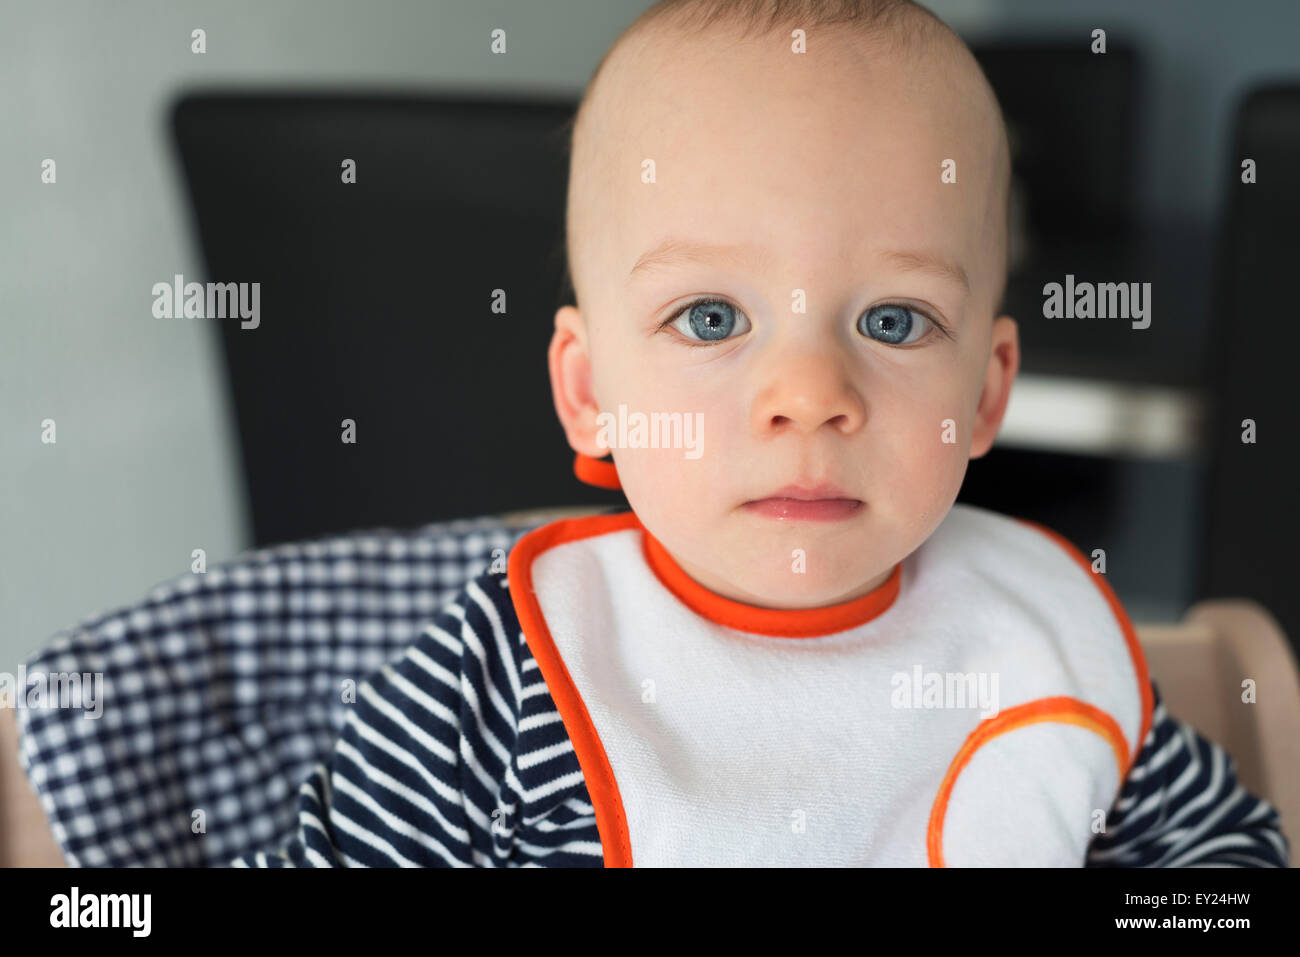 Portrait of staring baby boy in high chair Stock Photo